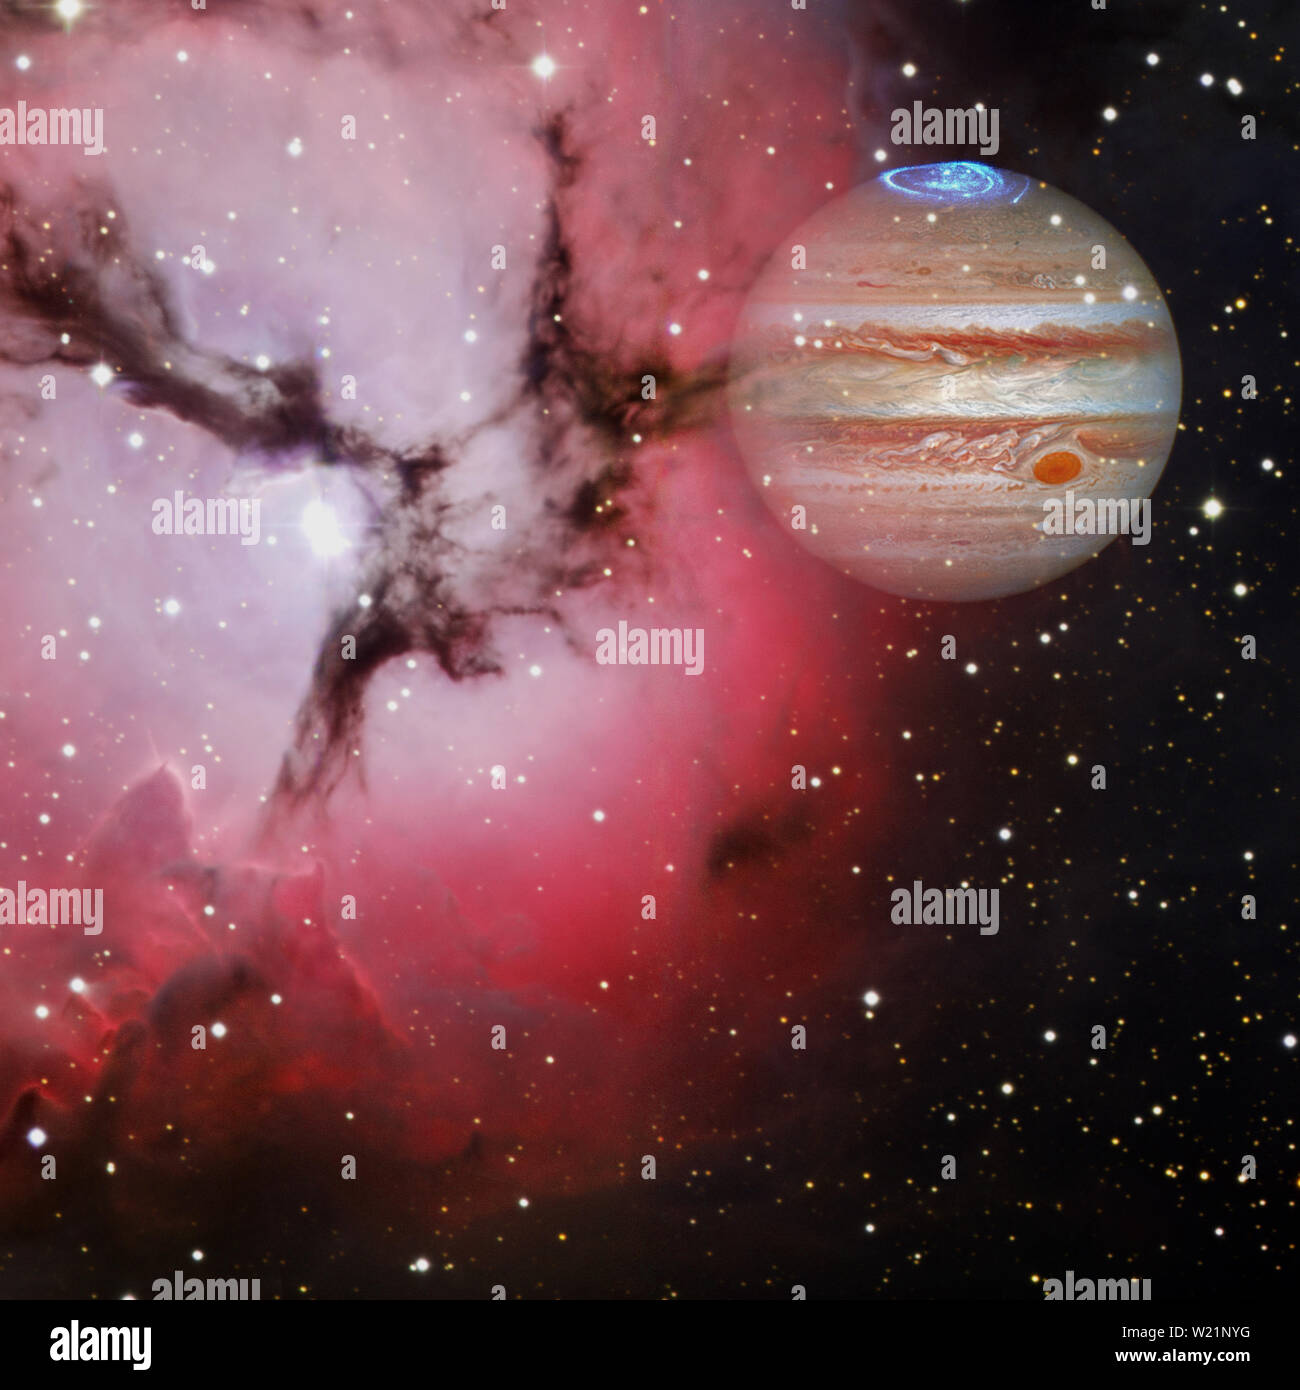 Planet Jupiter in the colorful starry universe. Elements of this image furnished by NASA. Stock Photo